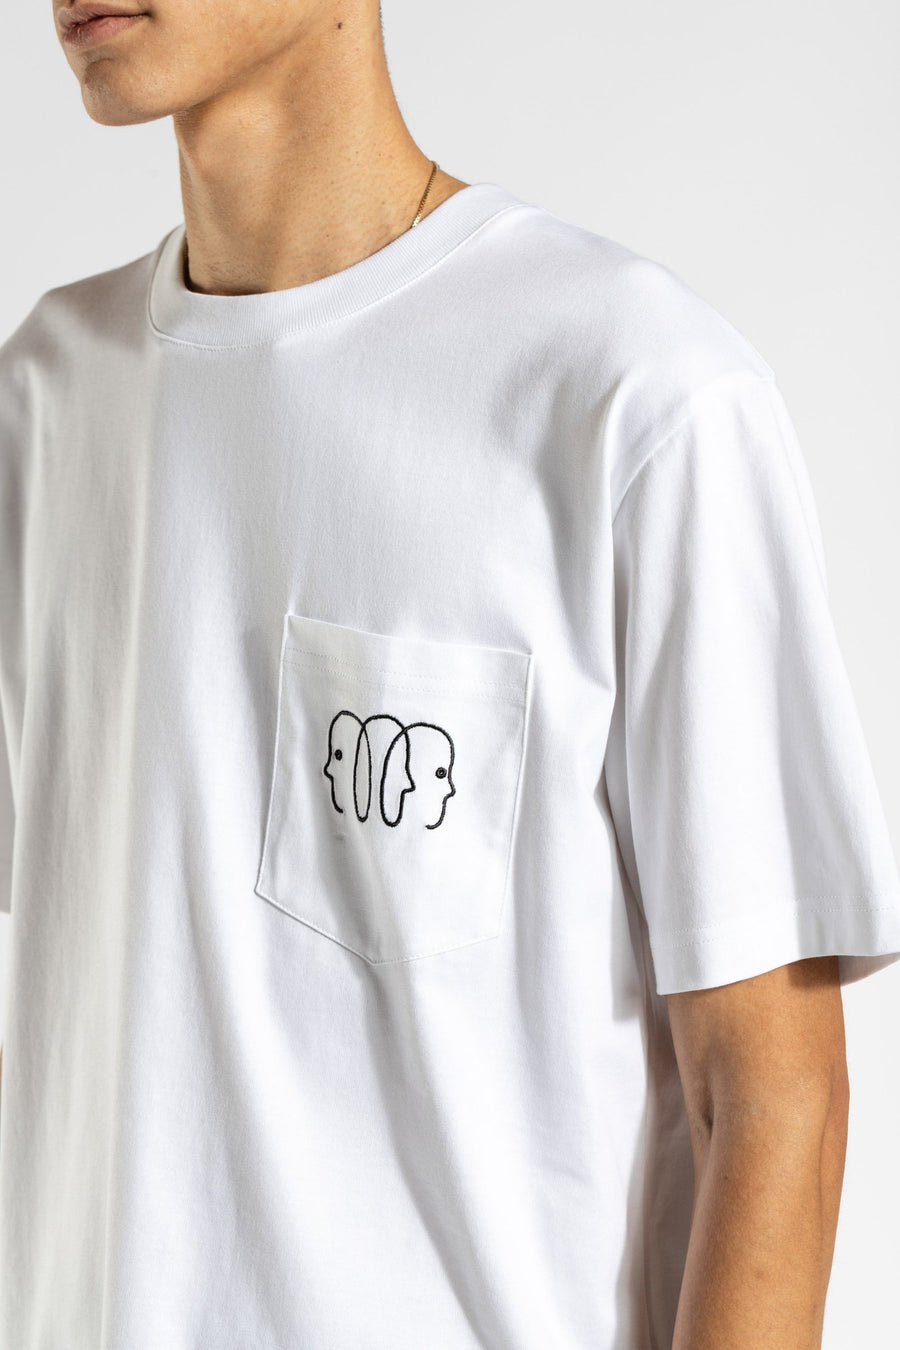 Norse Projects x Geoff McFetridge Johannes Faces White